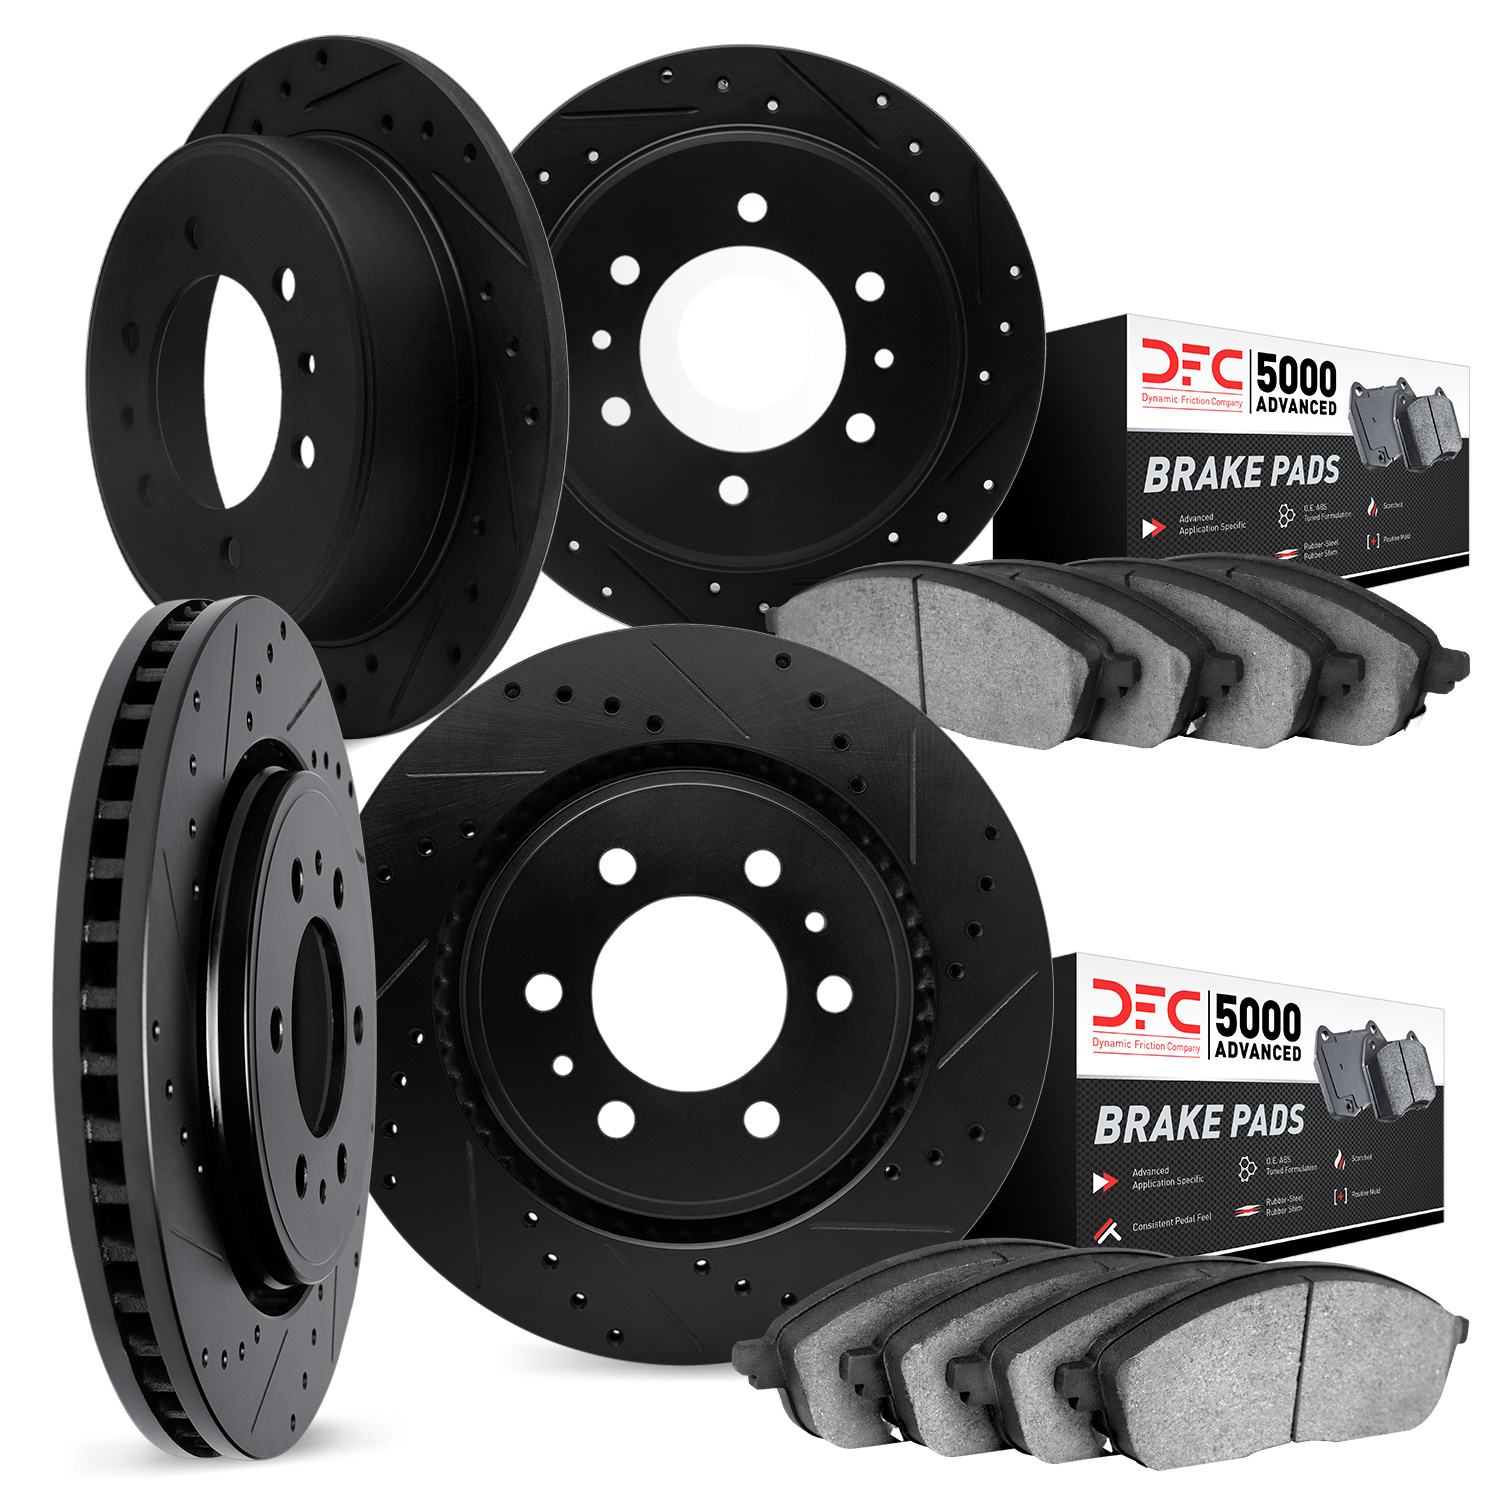 7504-93001 Drilled/Slotted Brake Rotors w/5000 Advanced Brake Pads Kit [Silver], 2006-2010 GM, Position: Front and Rear